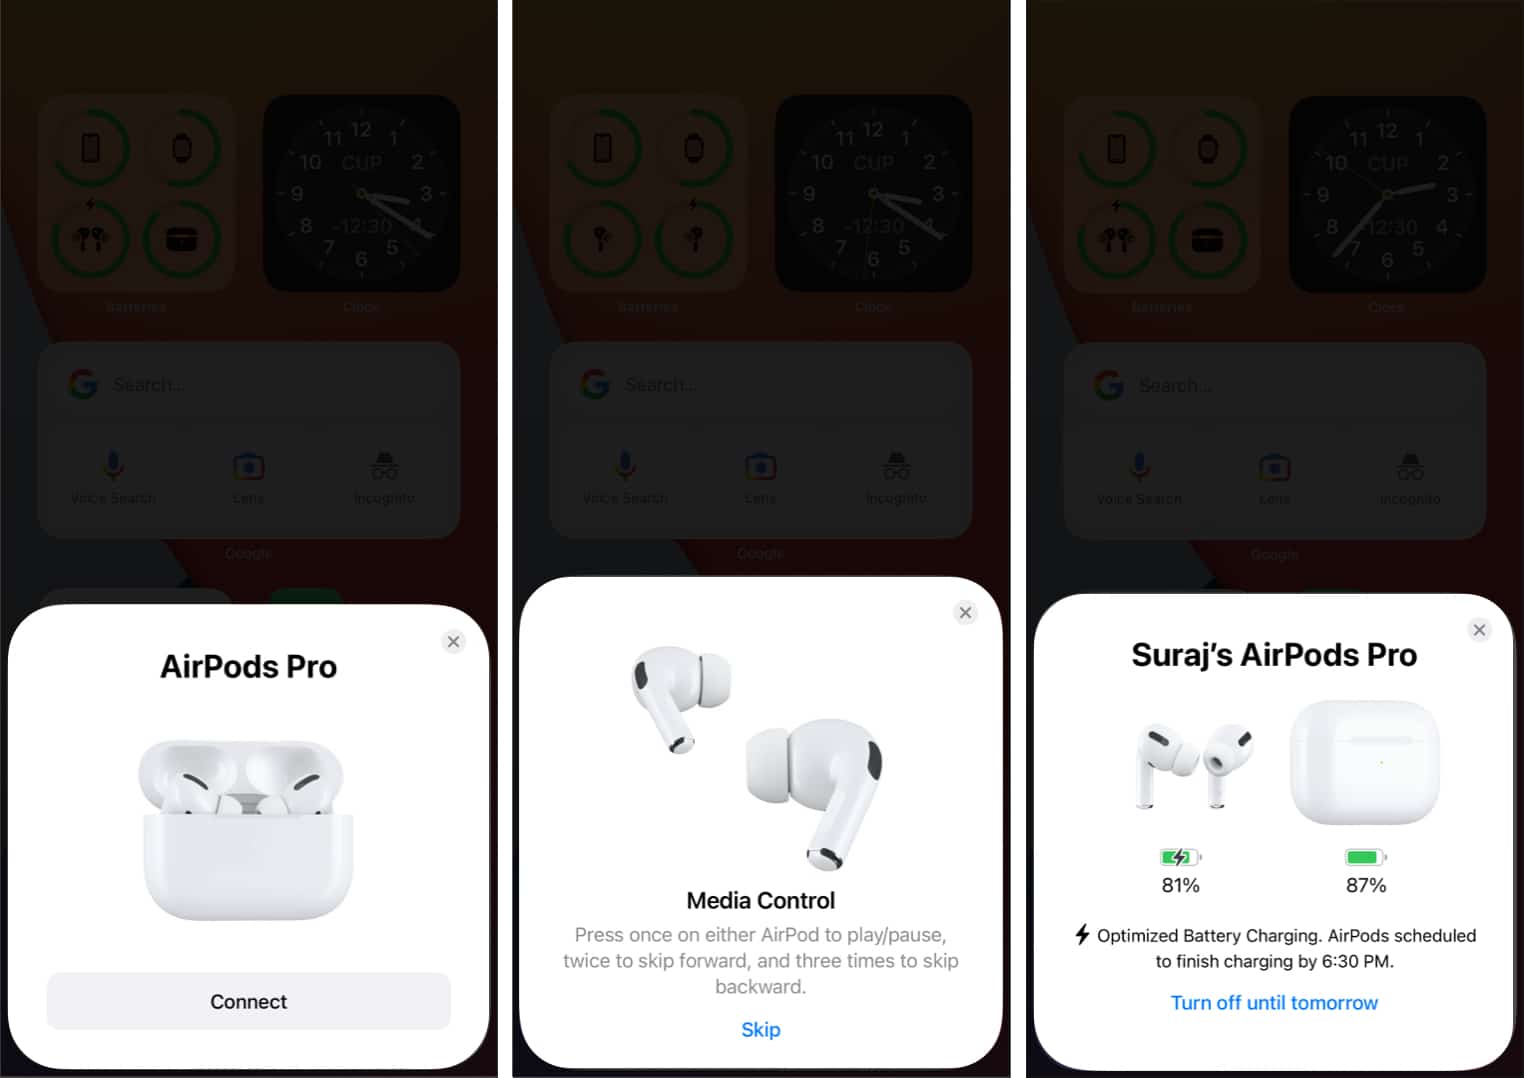 Re-pair your AirPods with iPhone